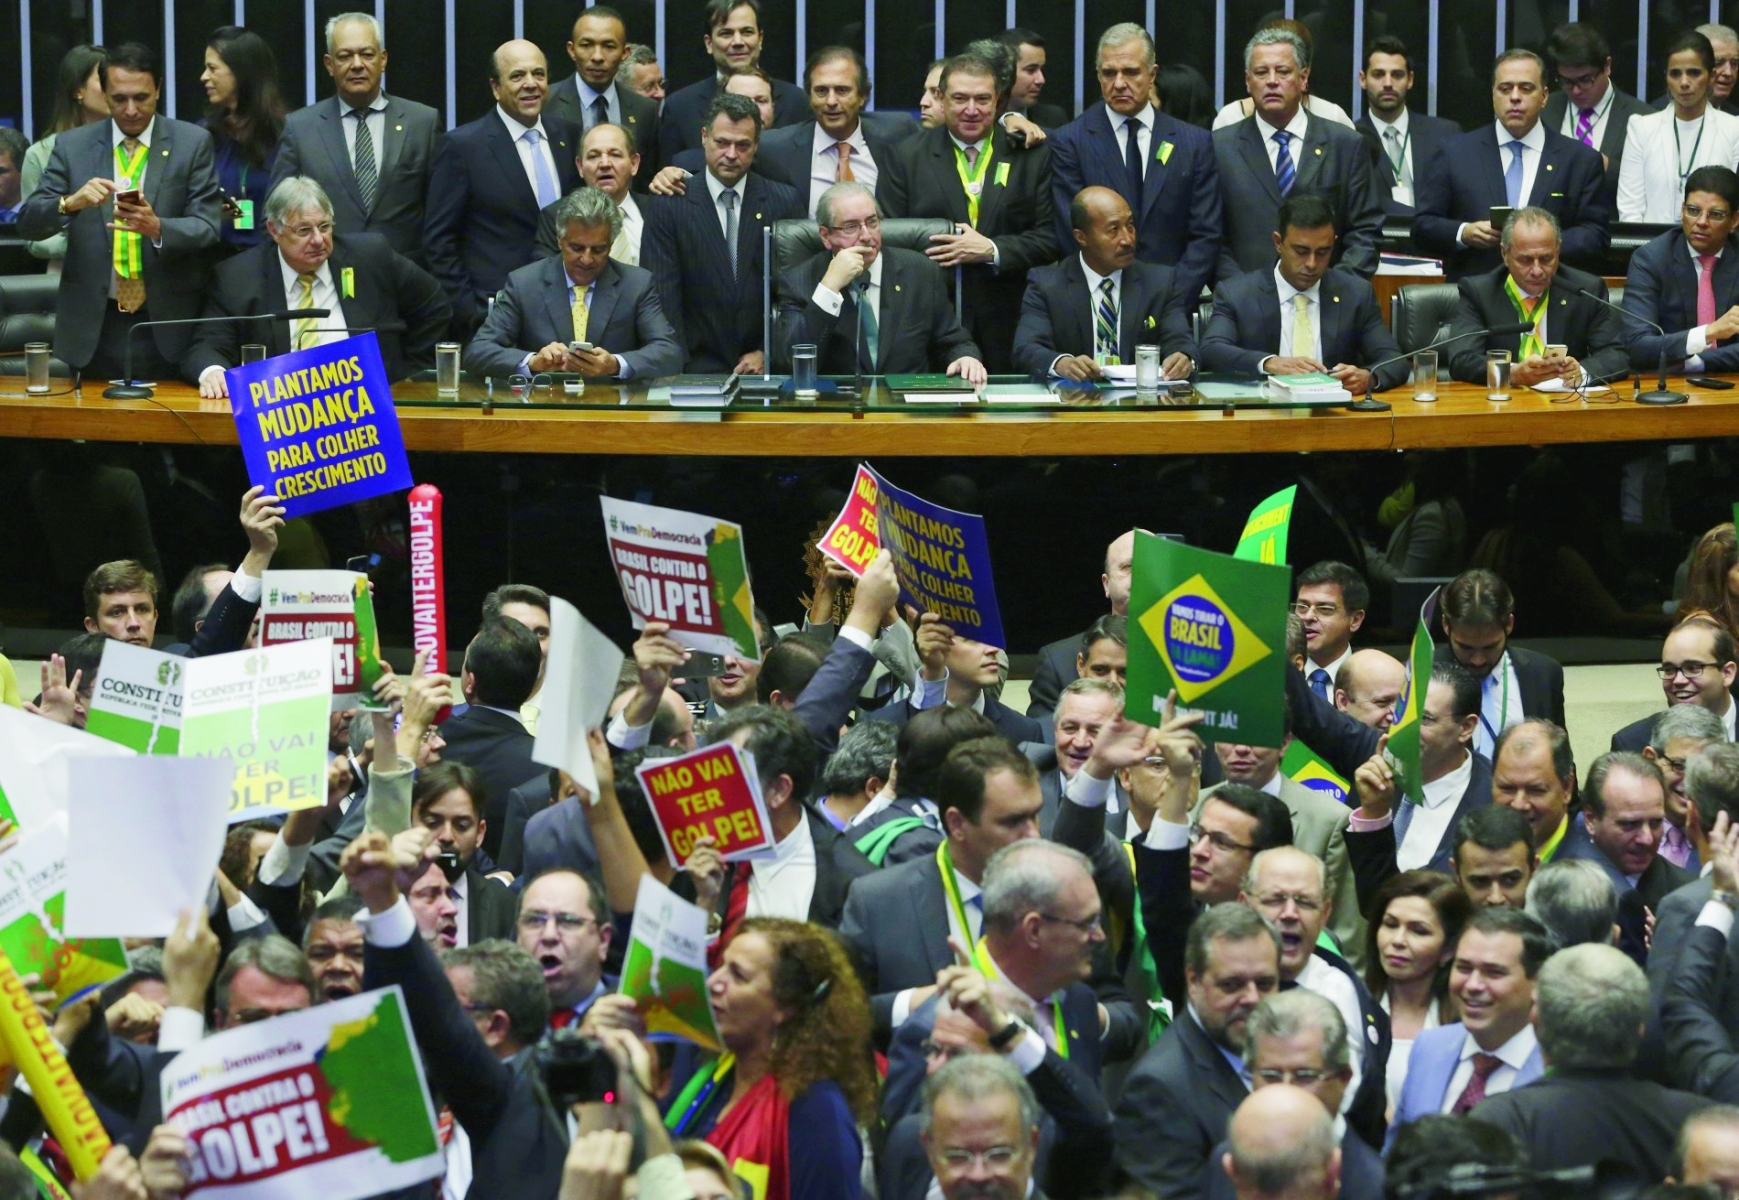 President of the Chamber of Deputies Eduardo Cunha, center on the table, starts the session on whether or not to impeachment President Dilma Rousseff, in Brasilia, Brazil, Sunday, April 17, 2016. The vote will determine whether the impeachment proceeds to the Senate. Rousseff is accused of violating Brazil's fiscal laws to shore up public support amid a flagging economy. (AP Photo/Eraldo Peres) Brazil Political Crisis